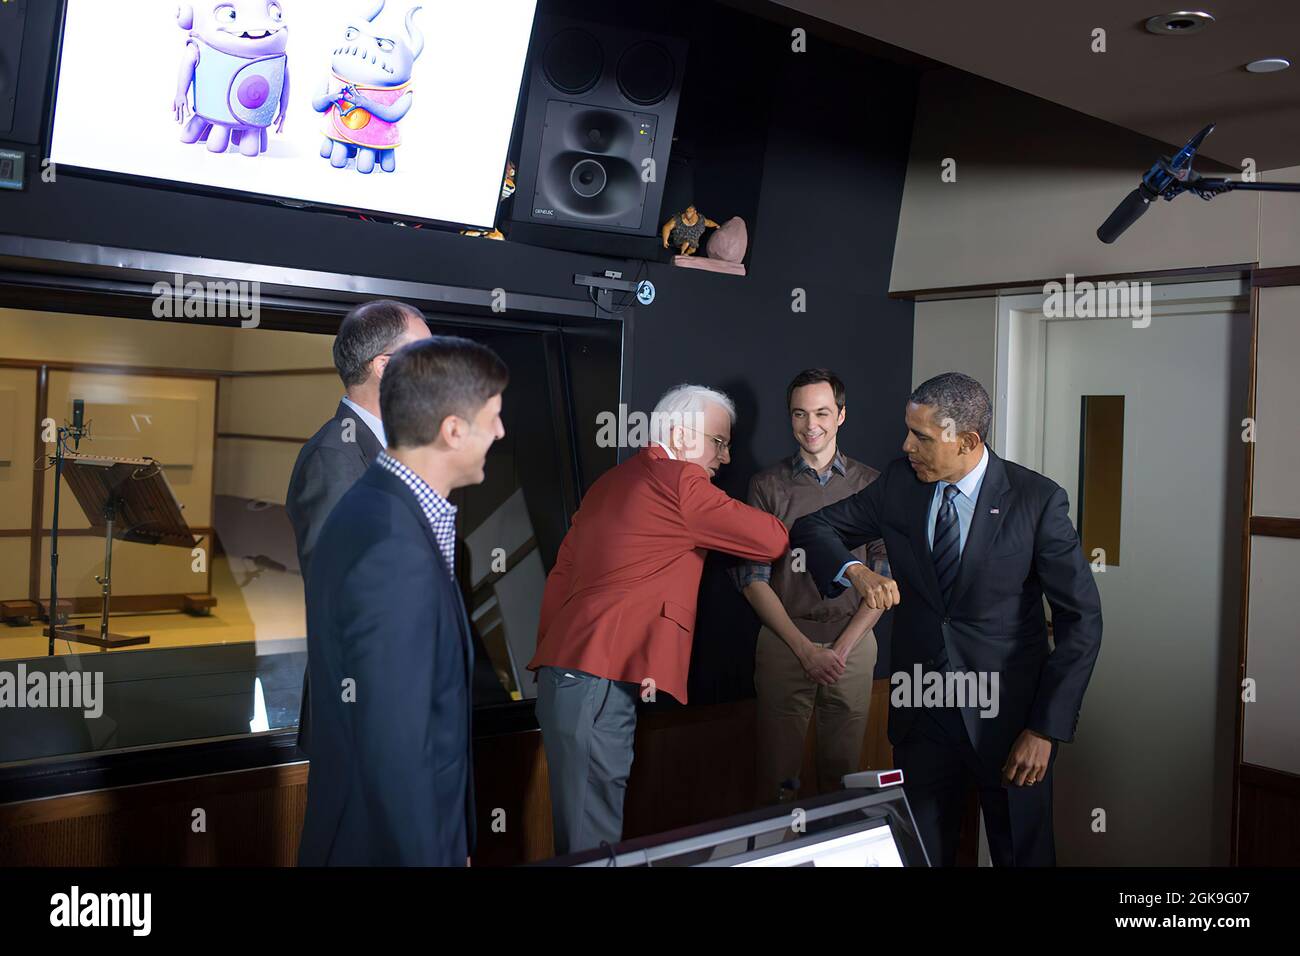 President Barack Obama greets Steve Martin during a tour of the Glendale campus of movie studio DreamWorks Animation SKG in Glendale, Calif., Nov. 26, 2013. (Official White House Photo by Chuck Kennedy) This official White House photograph is being made available only for publication by news organizations and/or for personal use printing by the subject(s) of the photograph. The photograph may not be manipulated in any way and may not be used in commercial or political materials, advertisements, emails, products, promotions that in any way suggests approval or endorsement of the President, the Stock Photo